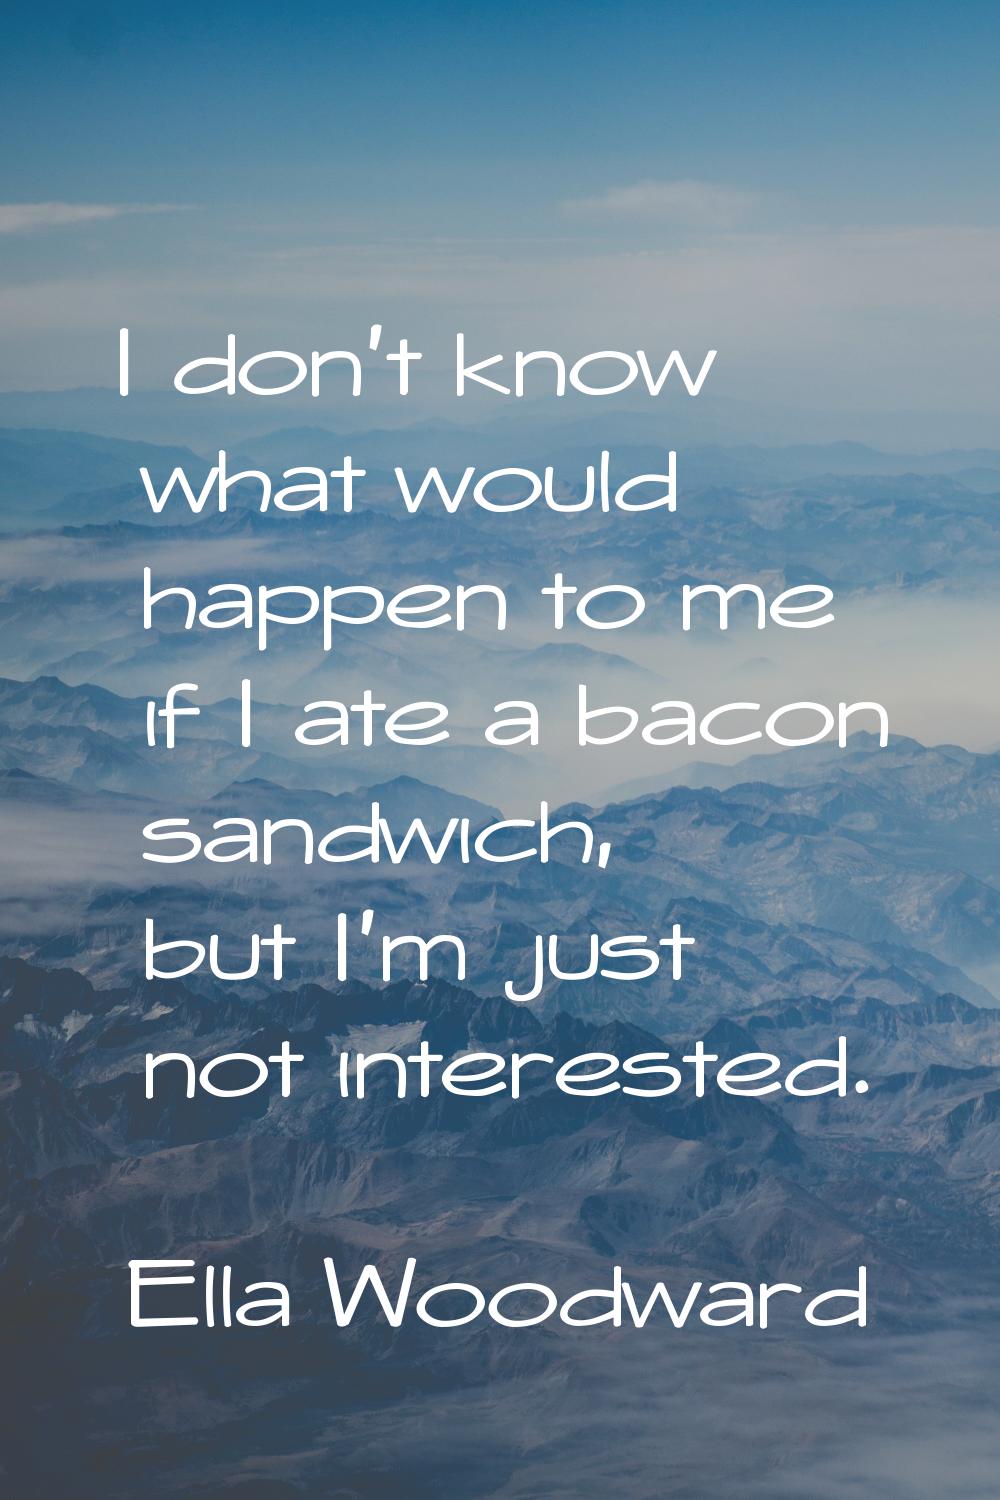 I don't know what would happen to me if I ate a bacon sandwich, but I'm just not interested.